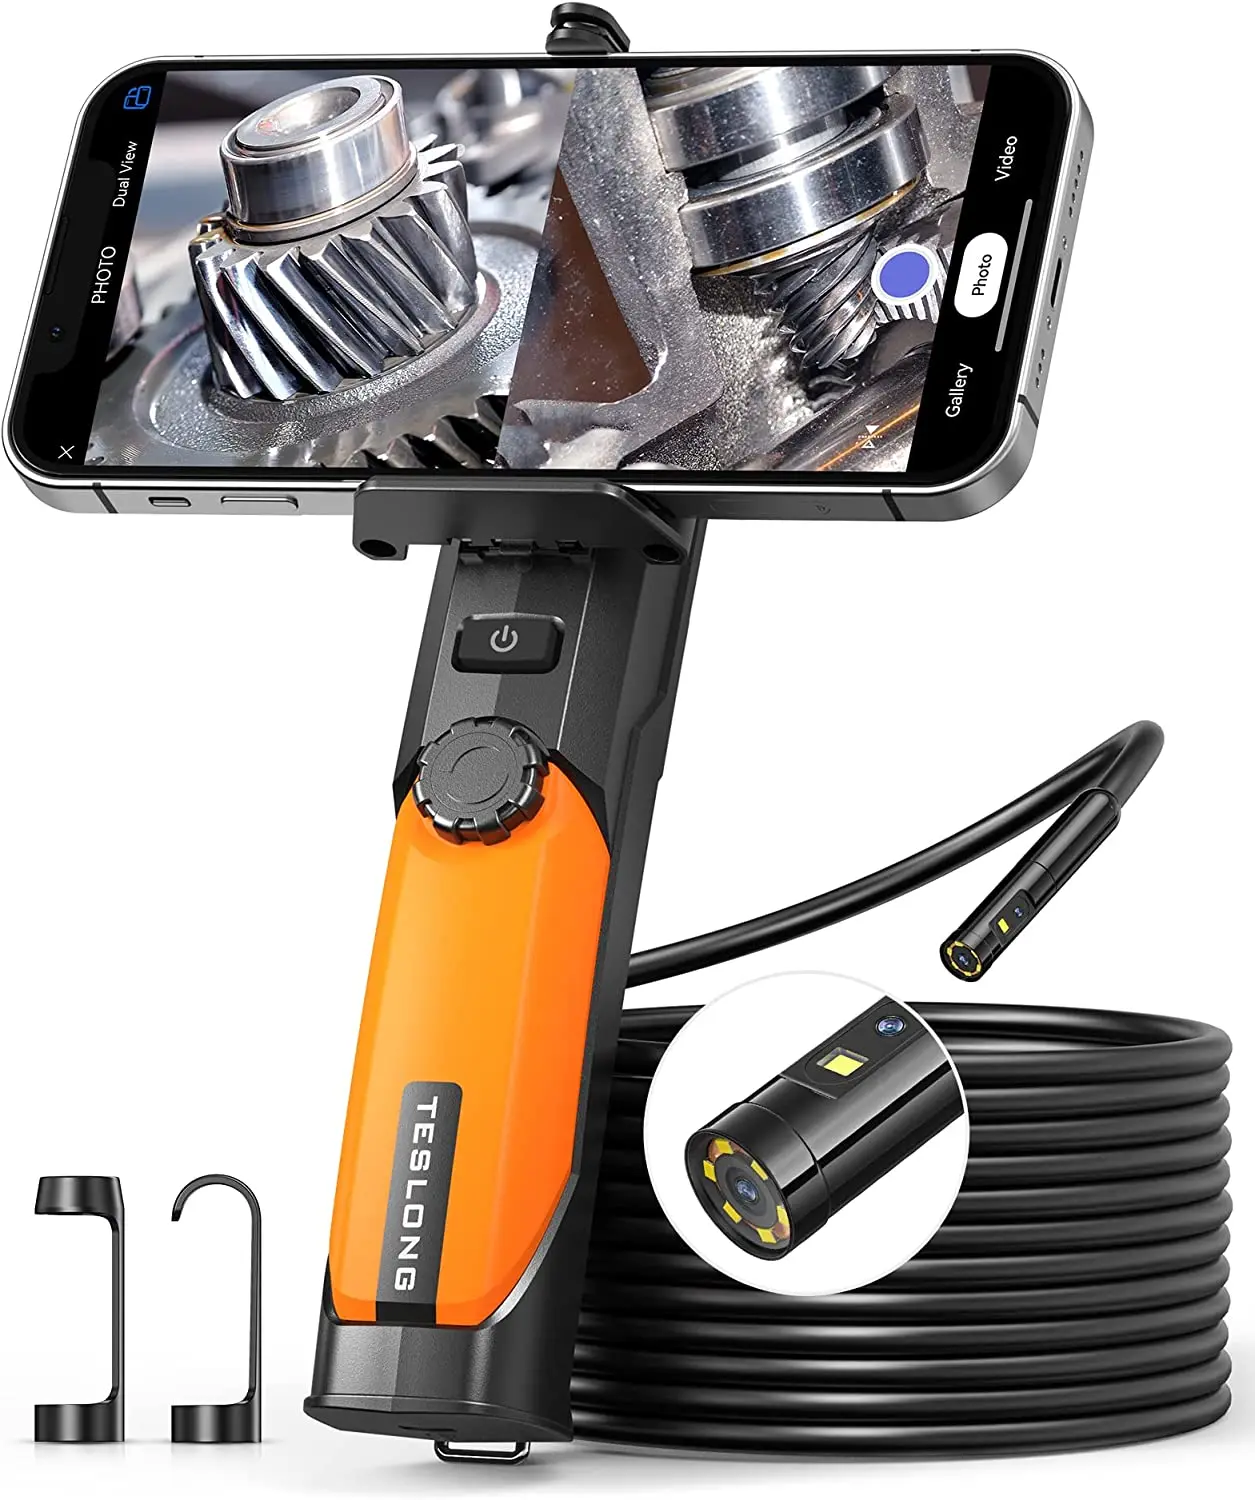 Dual Lens Wireless Endoscope, 2.0MP HD Inspection Camera, IP67 Waterproof Wifi Borescope Camera for iPhone & Android-16.5 FT